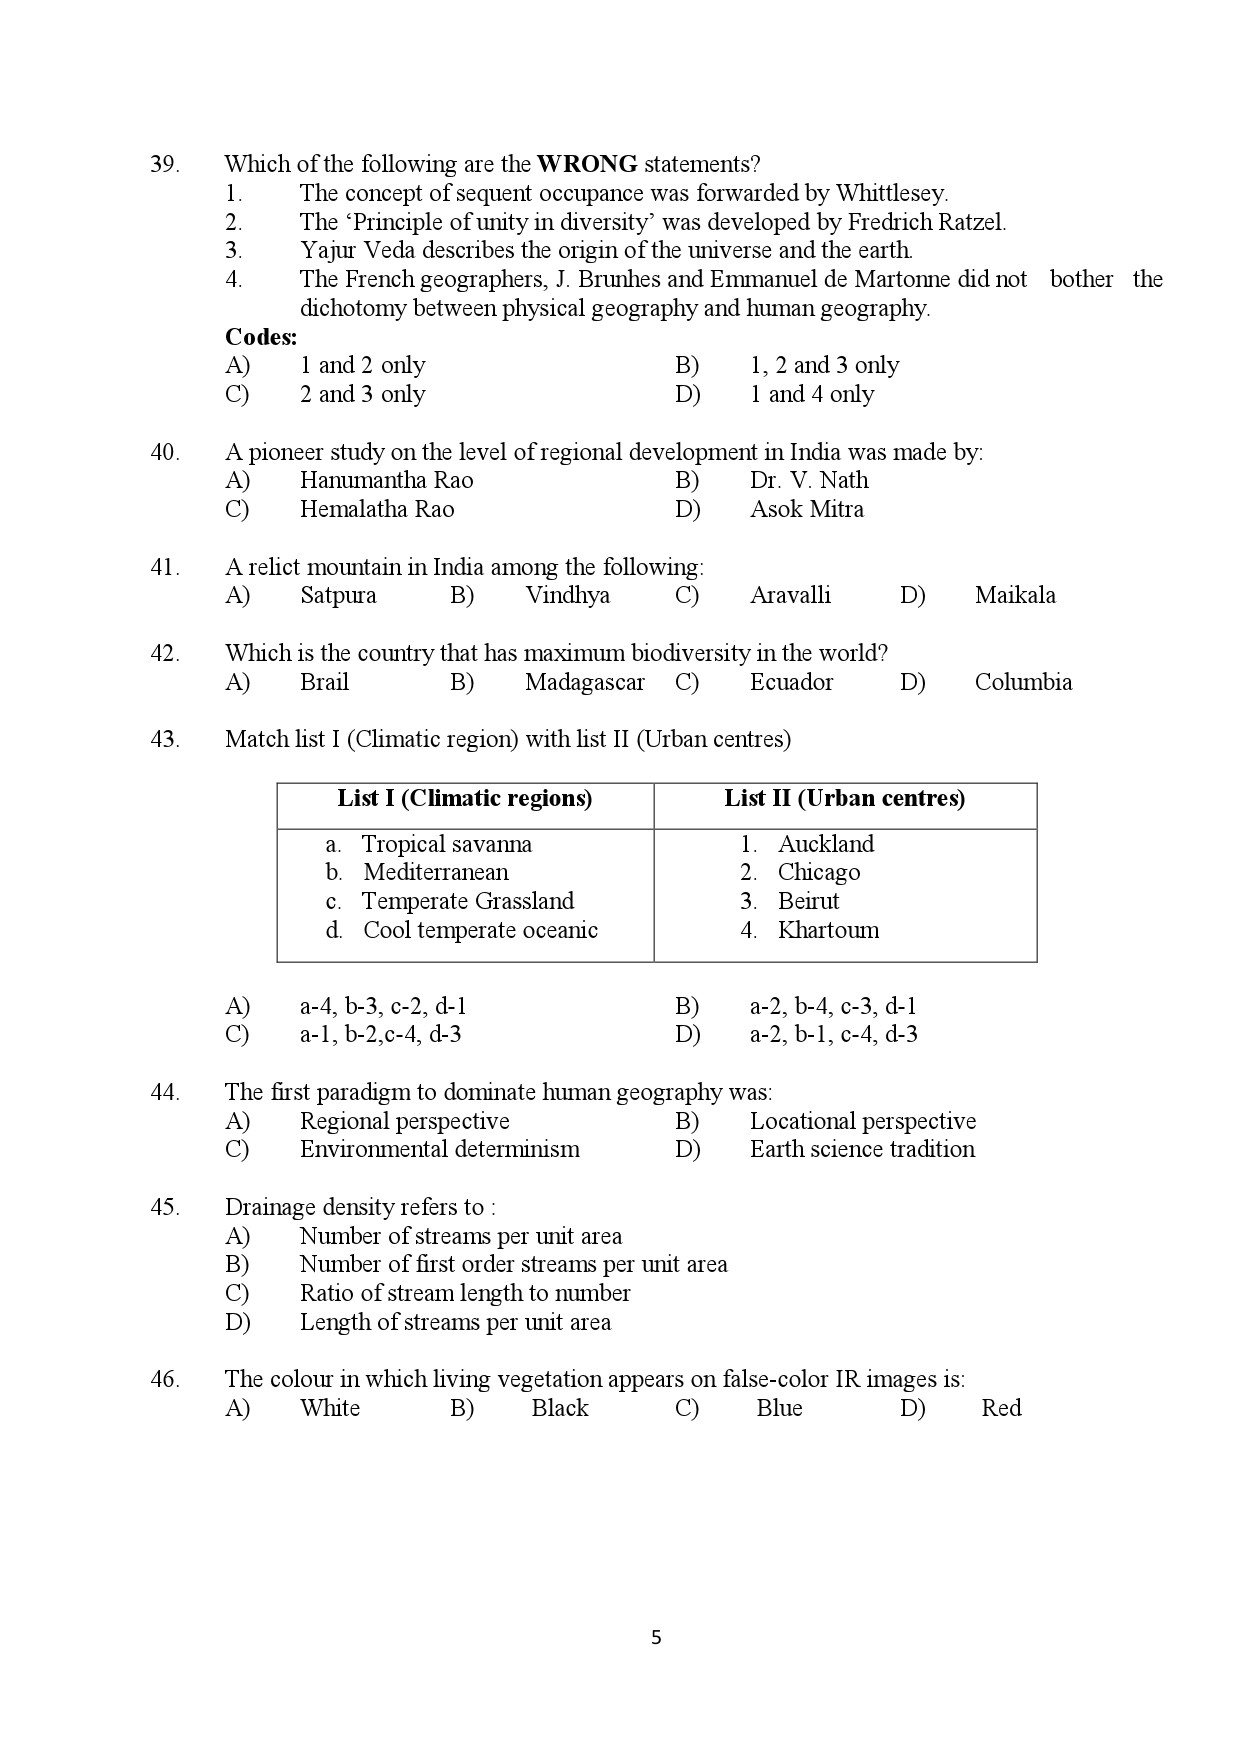 Kerala SET Geography Exam Question Paper February 2018 5